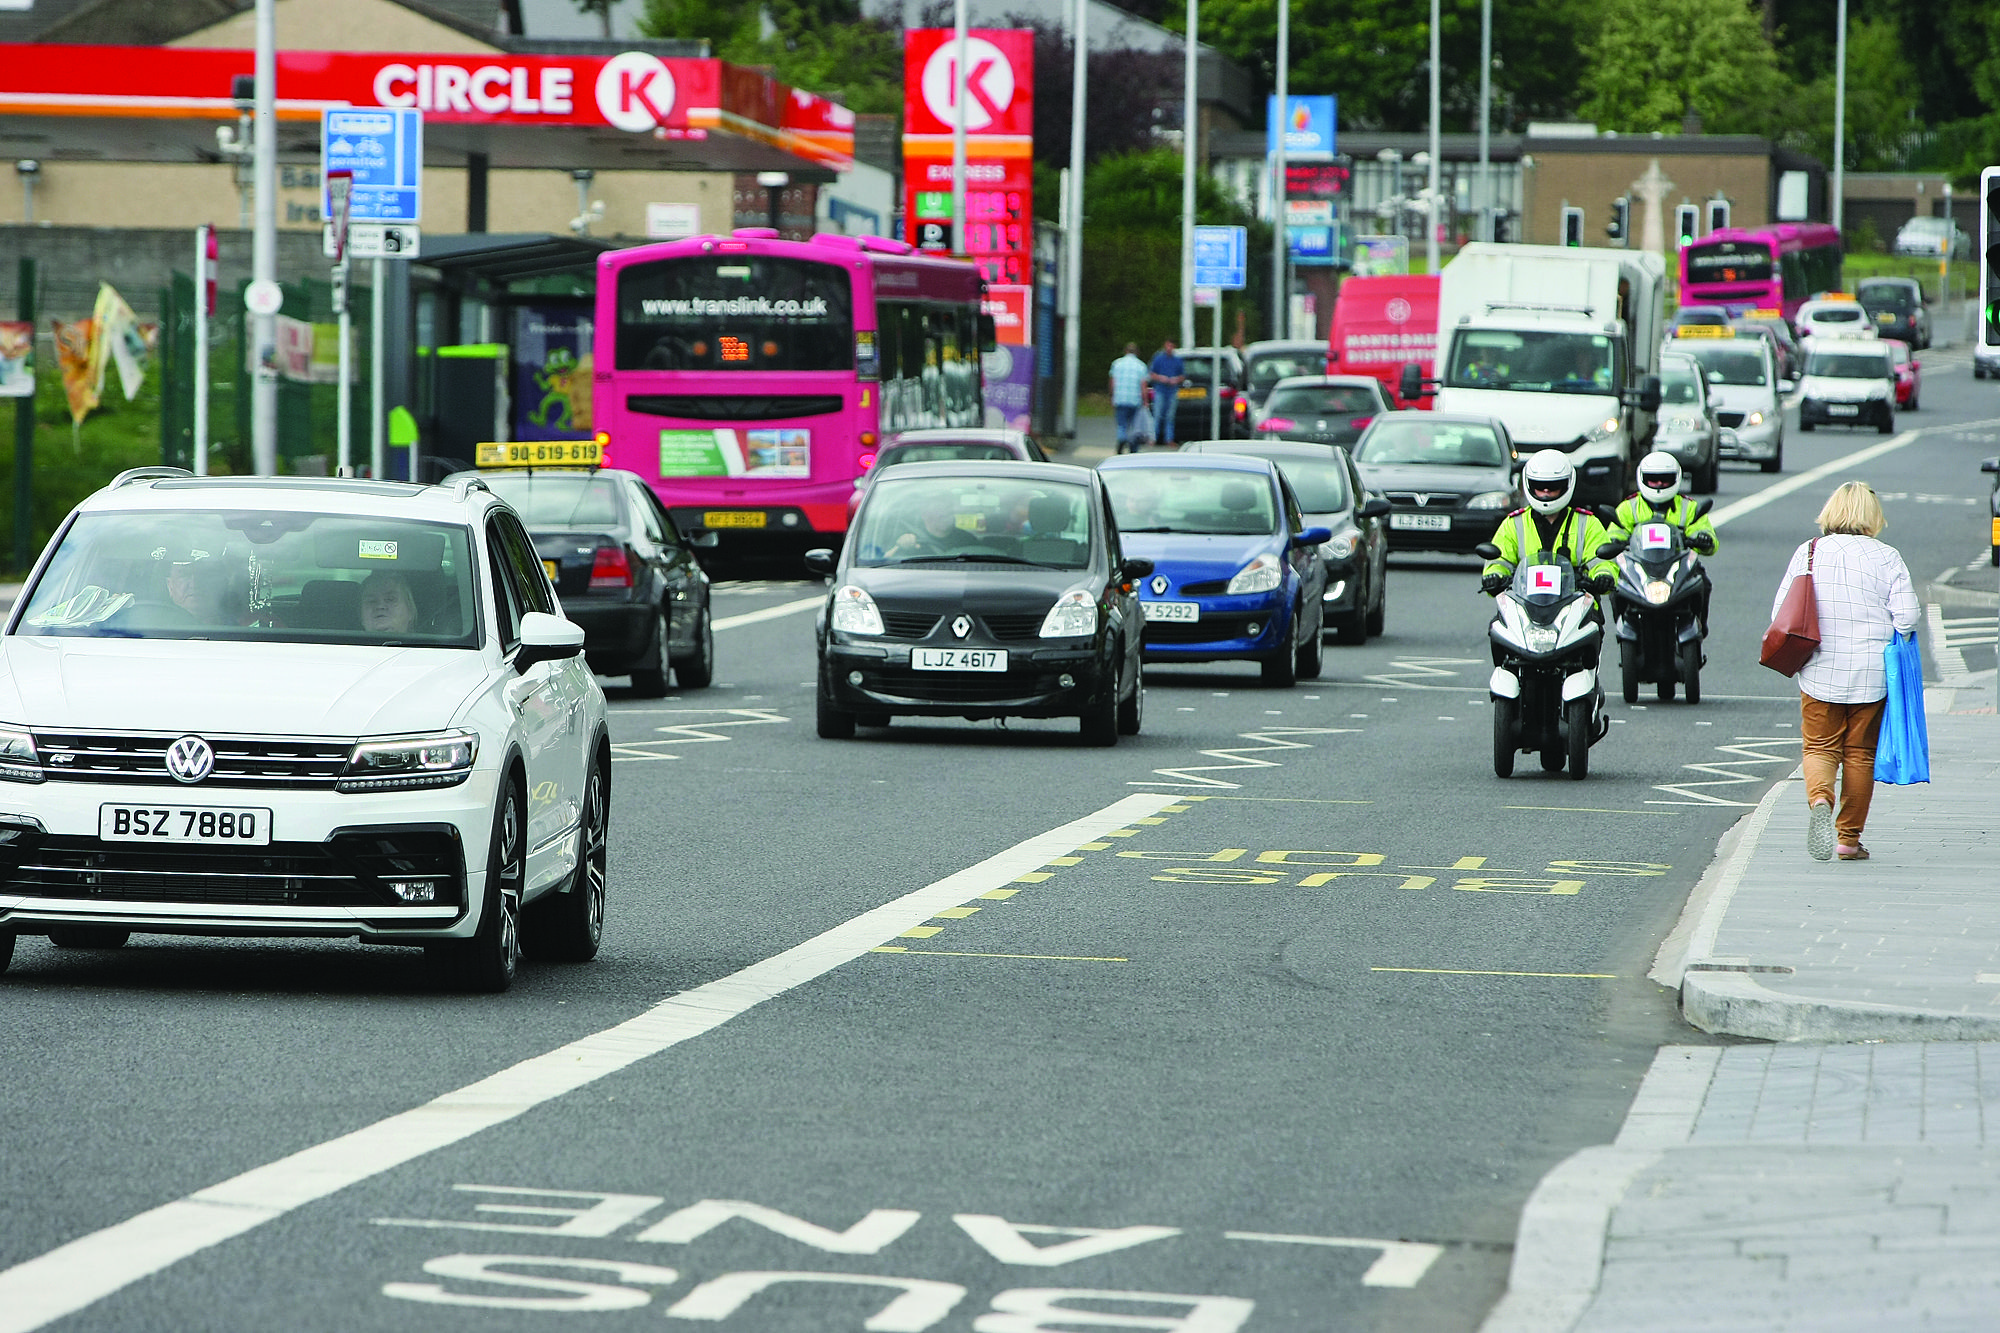 HOSPITALISED: The Andersonstown Road reopened after the accident